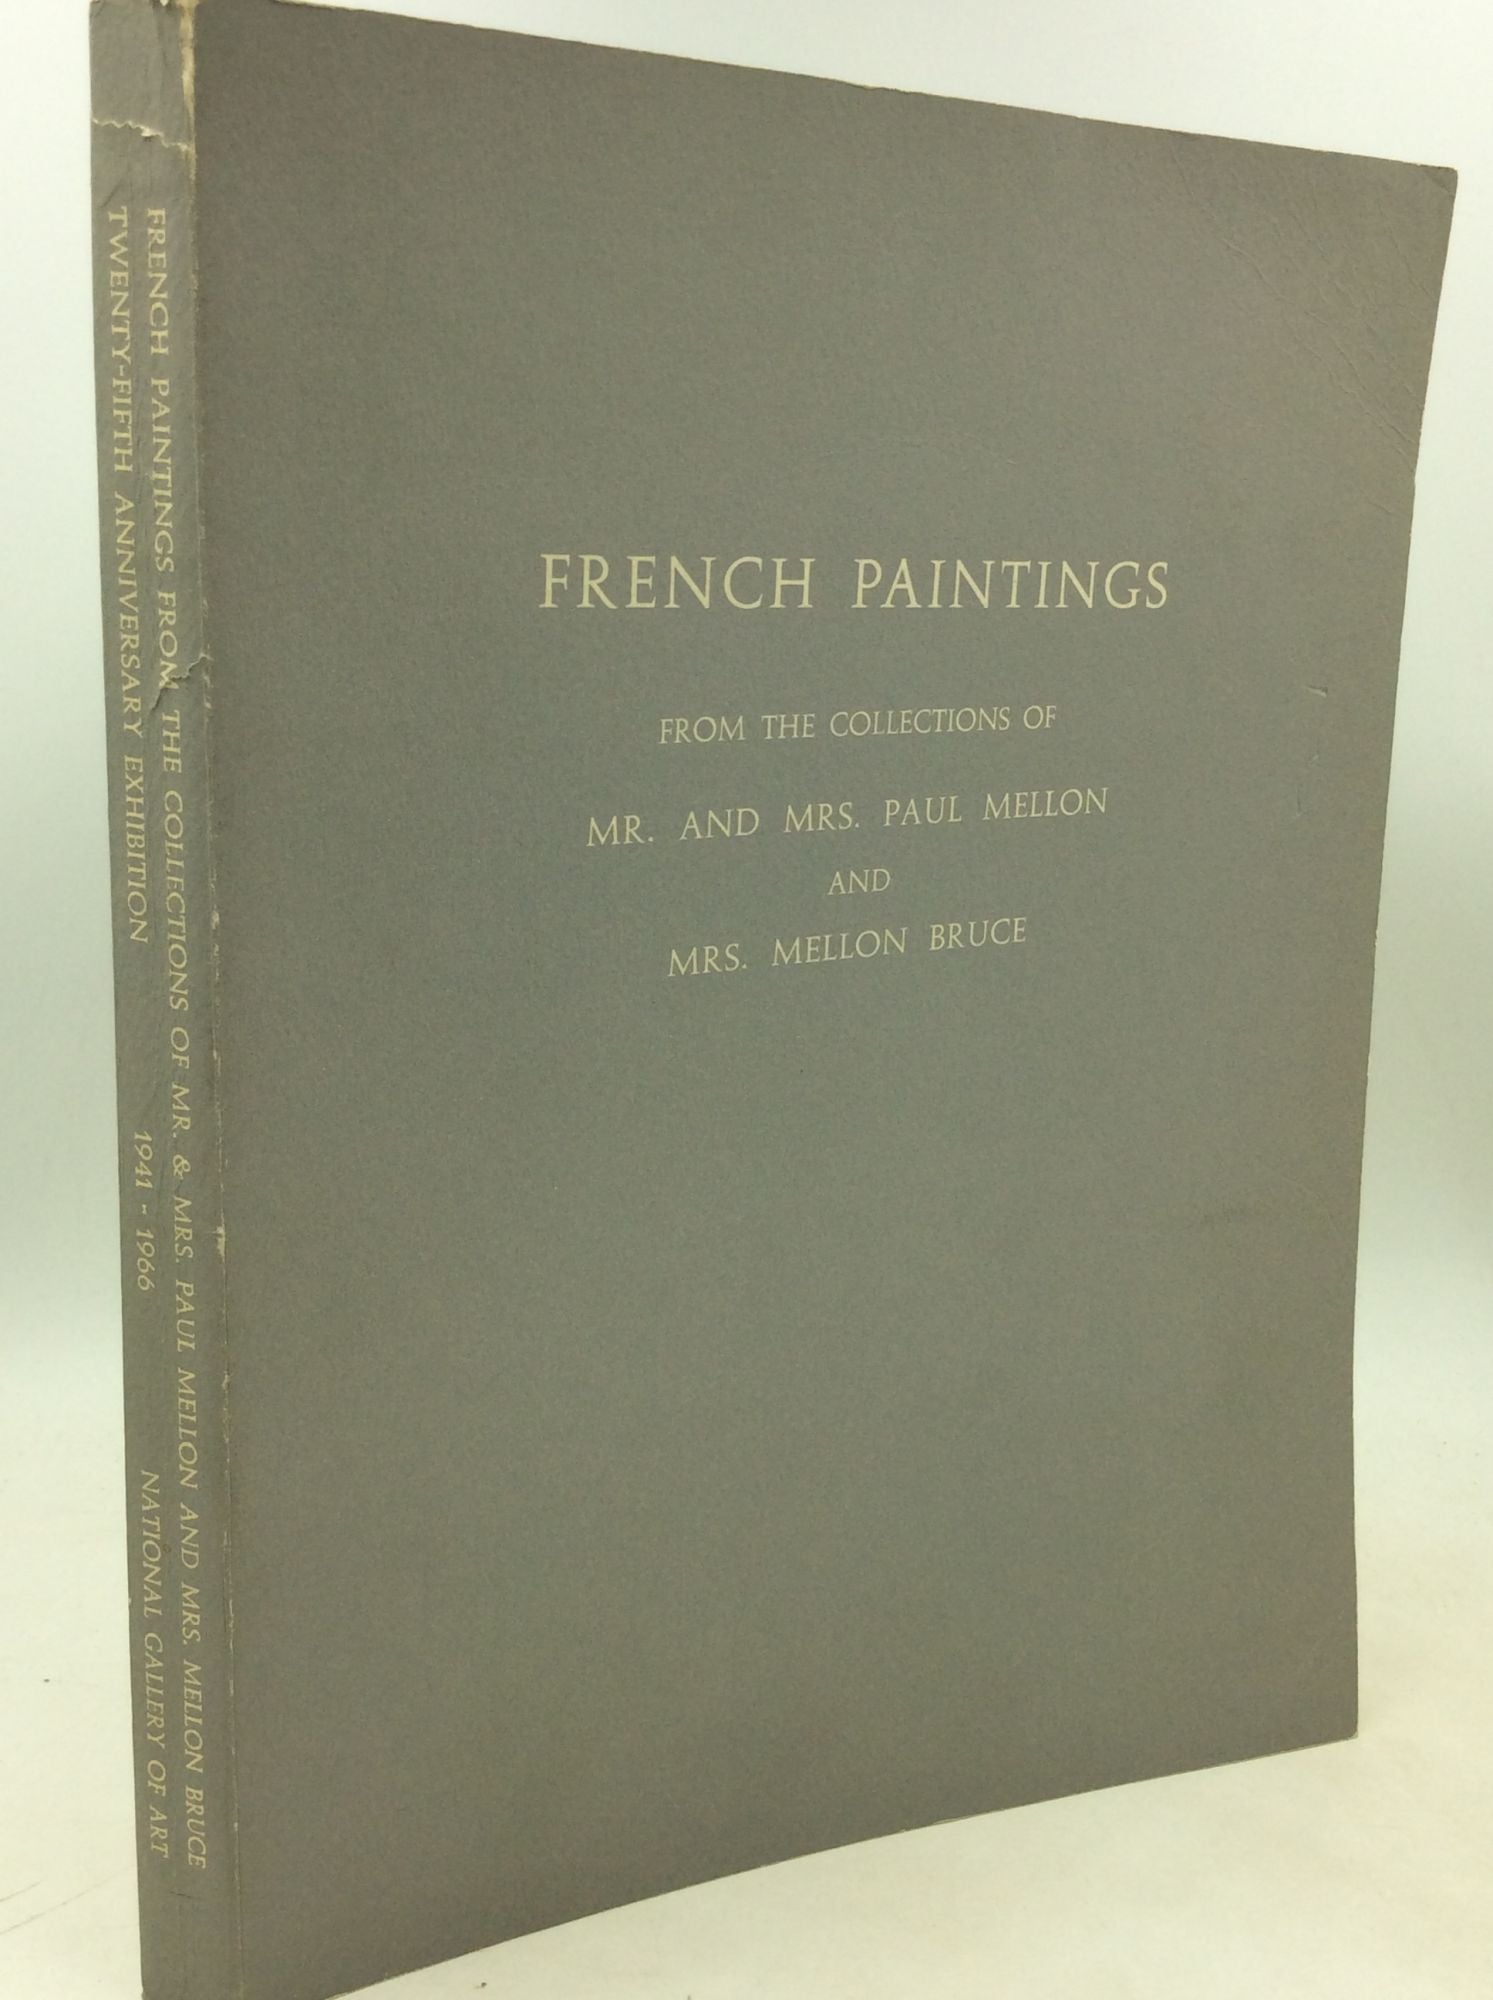  - French Paintings from the Collections of Mr. And Mrs. Paul Mellon and Mrs. Mellon Bruce: Twenty-Fifth Anniversary Exhibition 1941-1966; March 17 - May 1, 1966